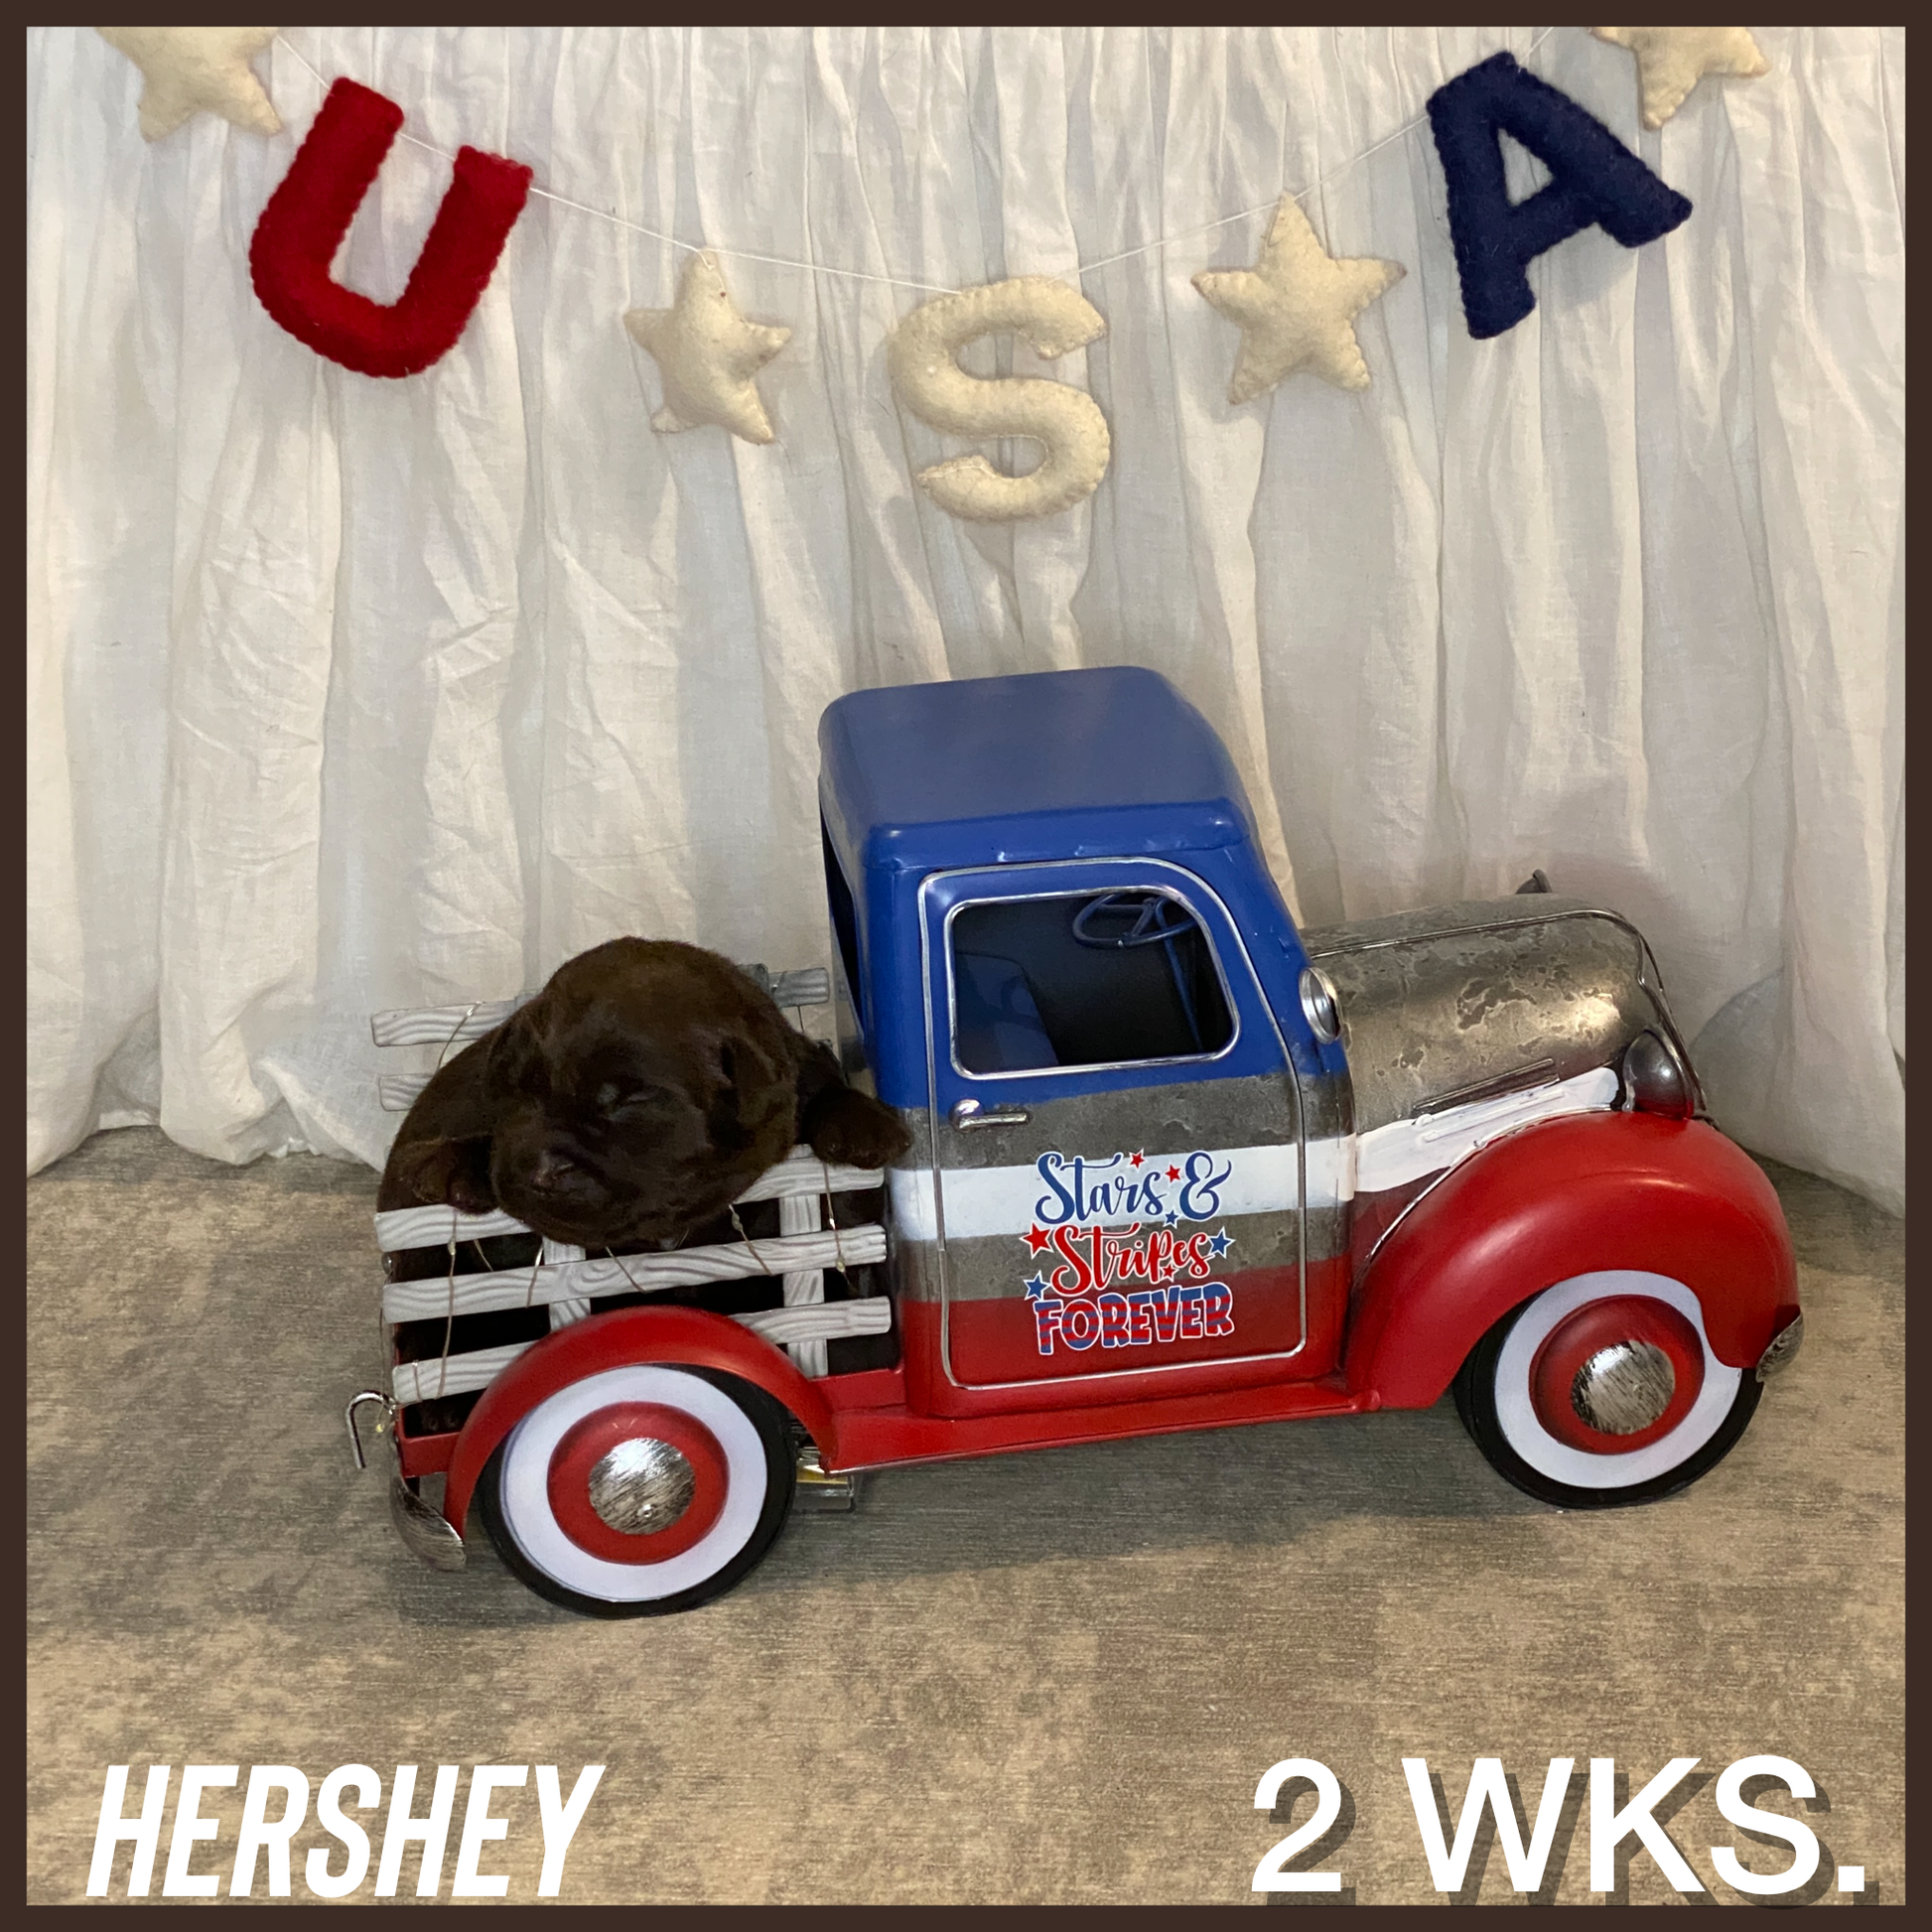 Male Chocolate Lab Puppy Hershey in a toy truck